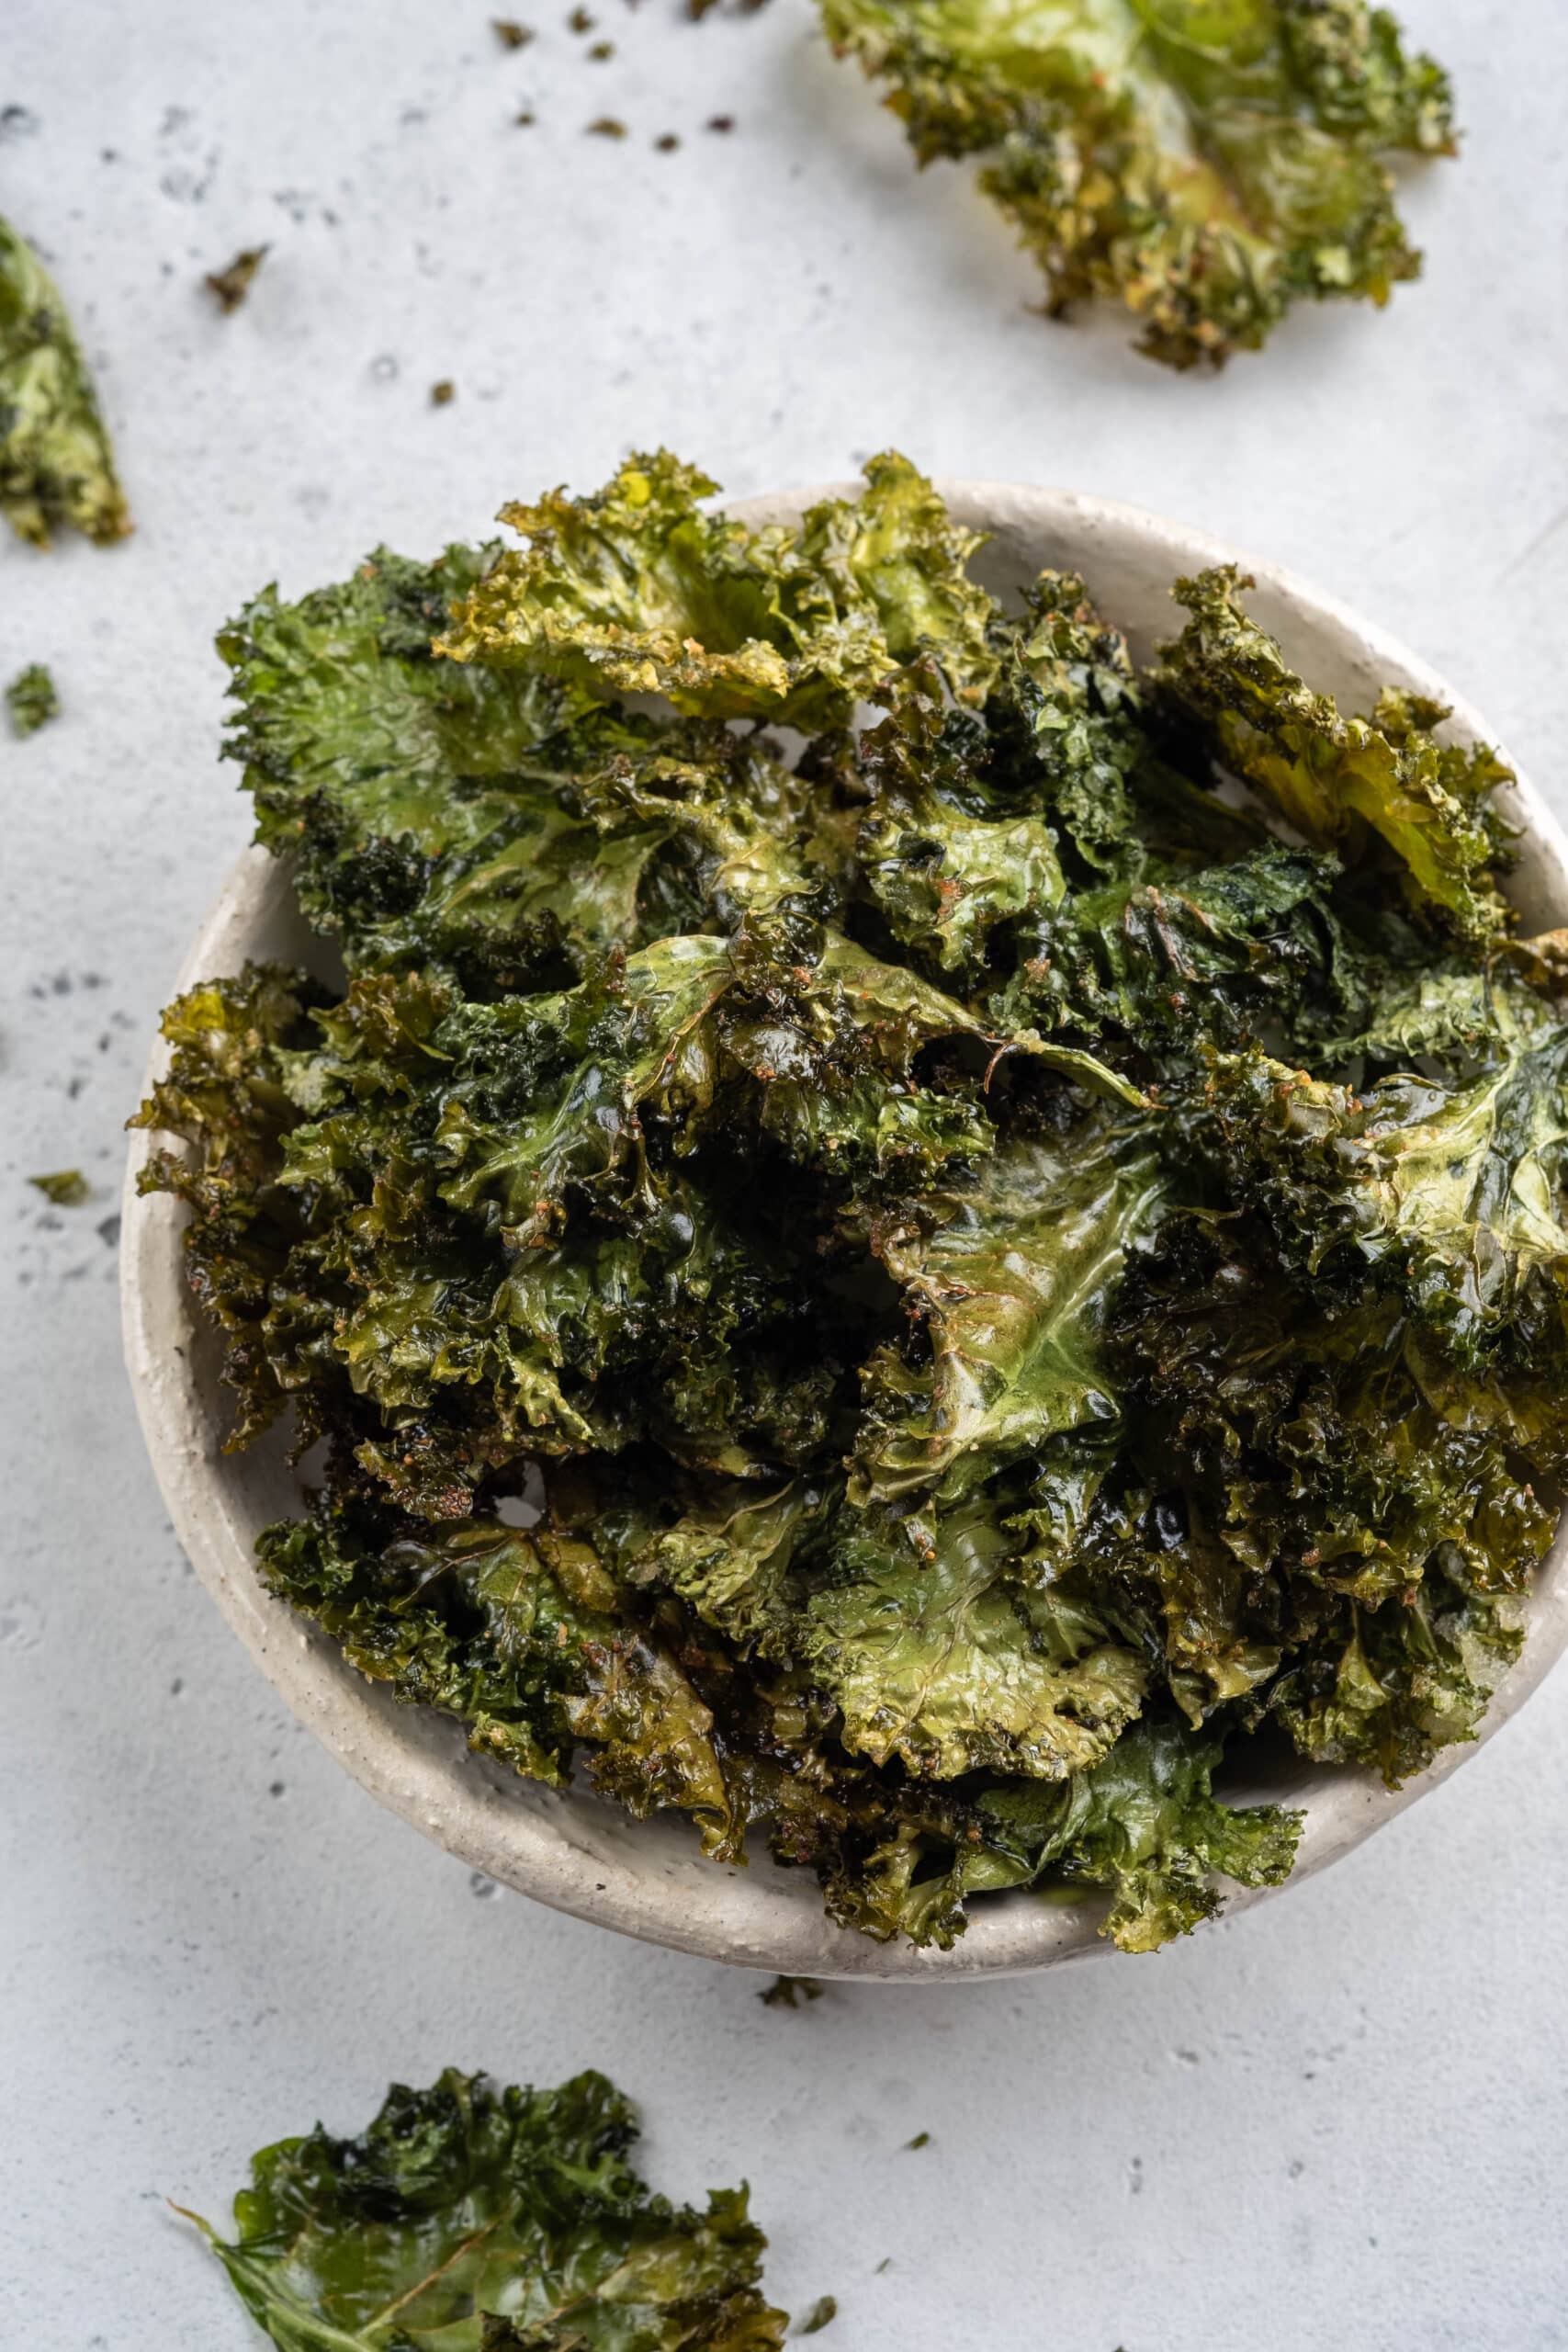 How long to Cook Kale Chips